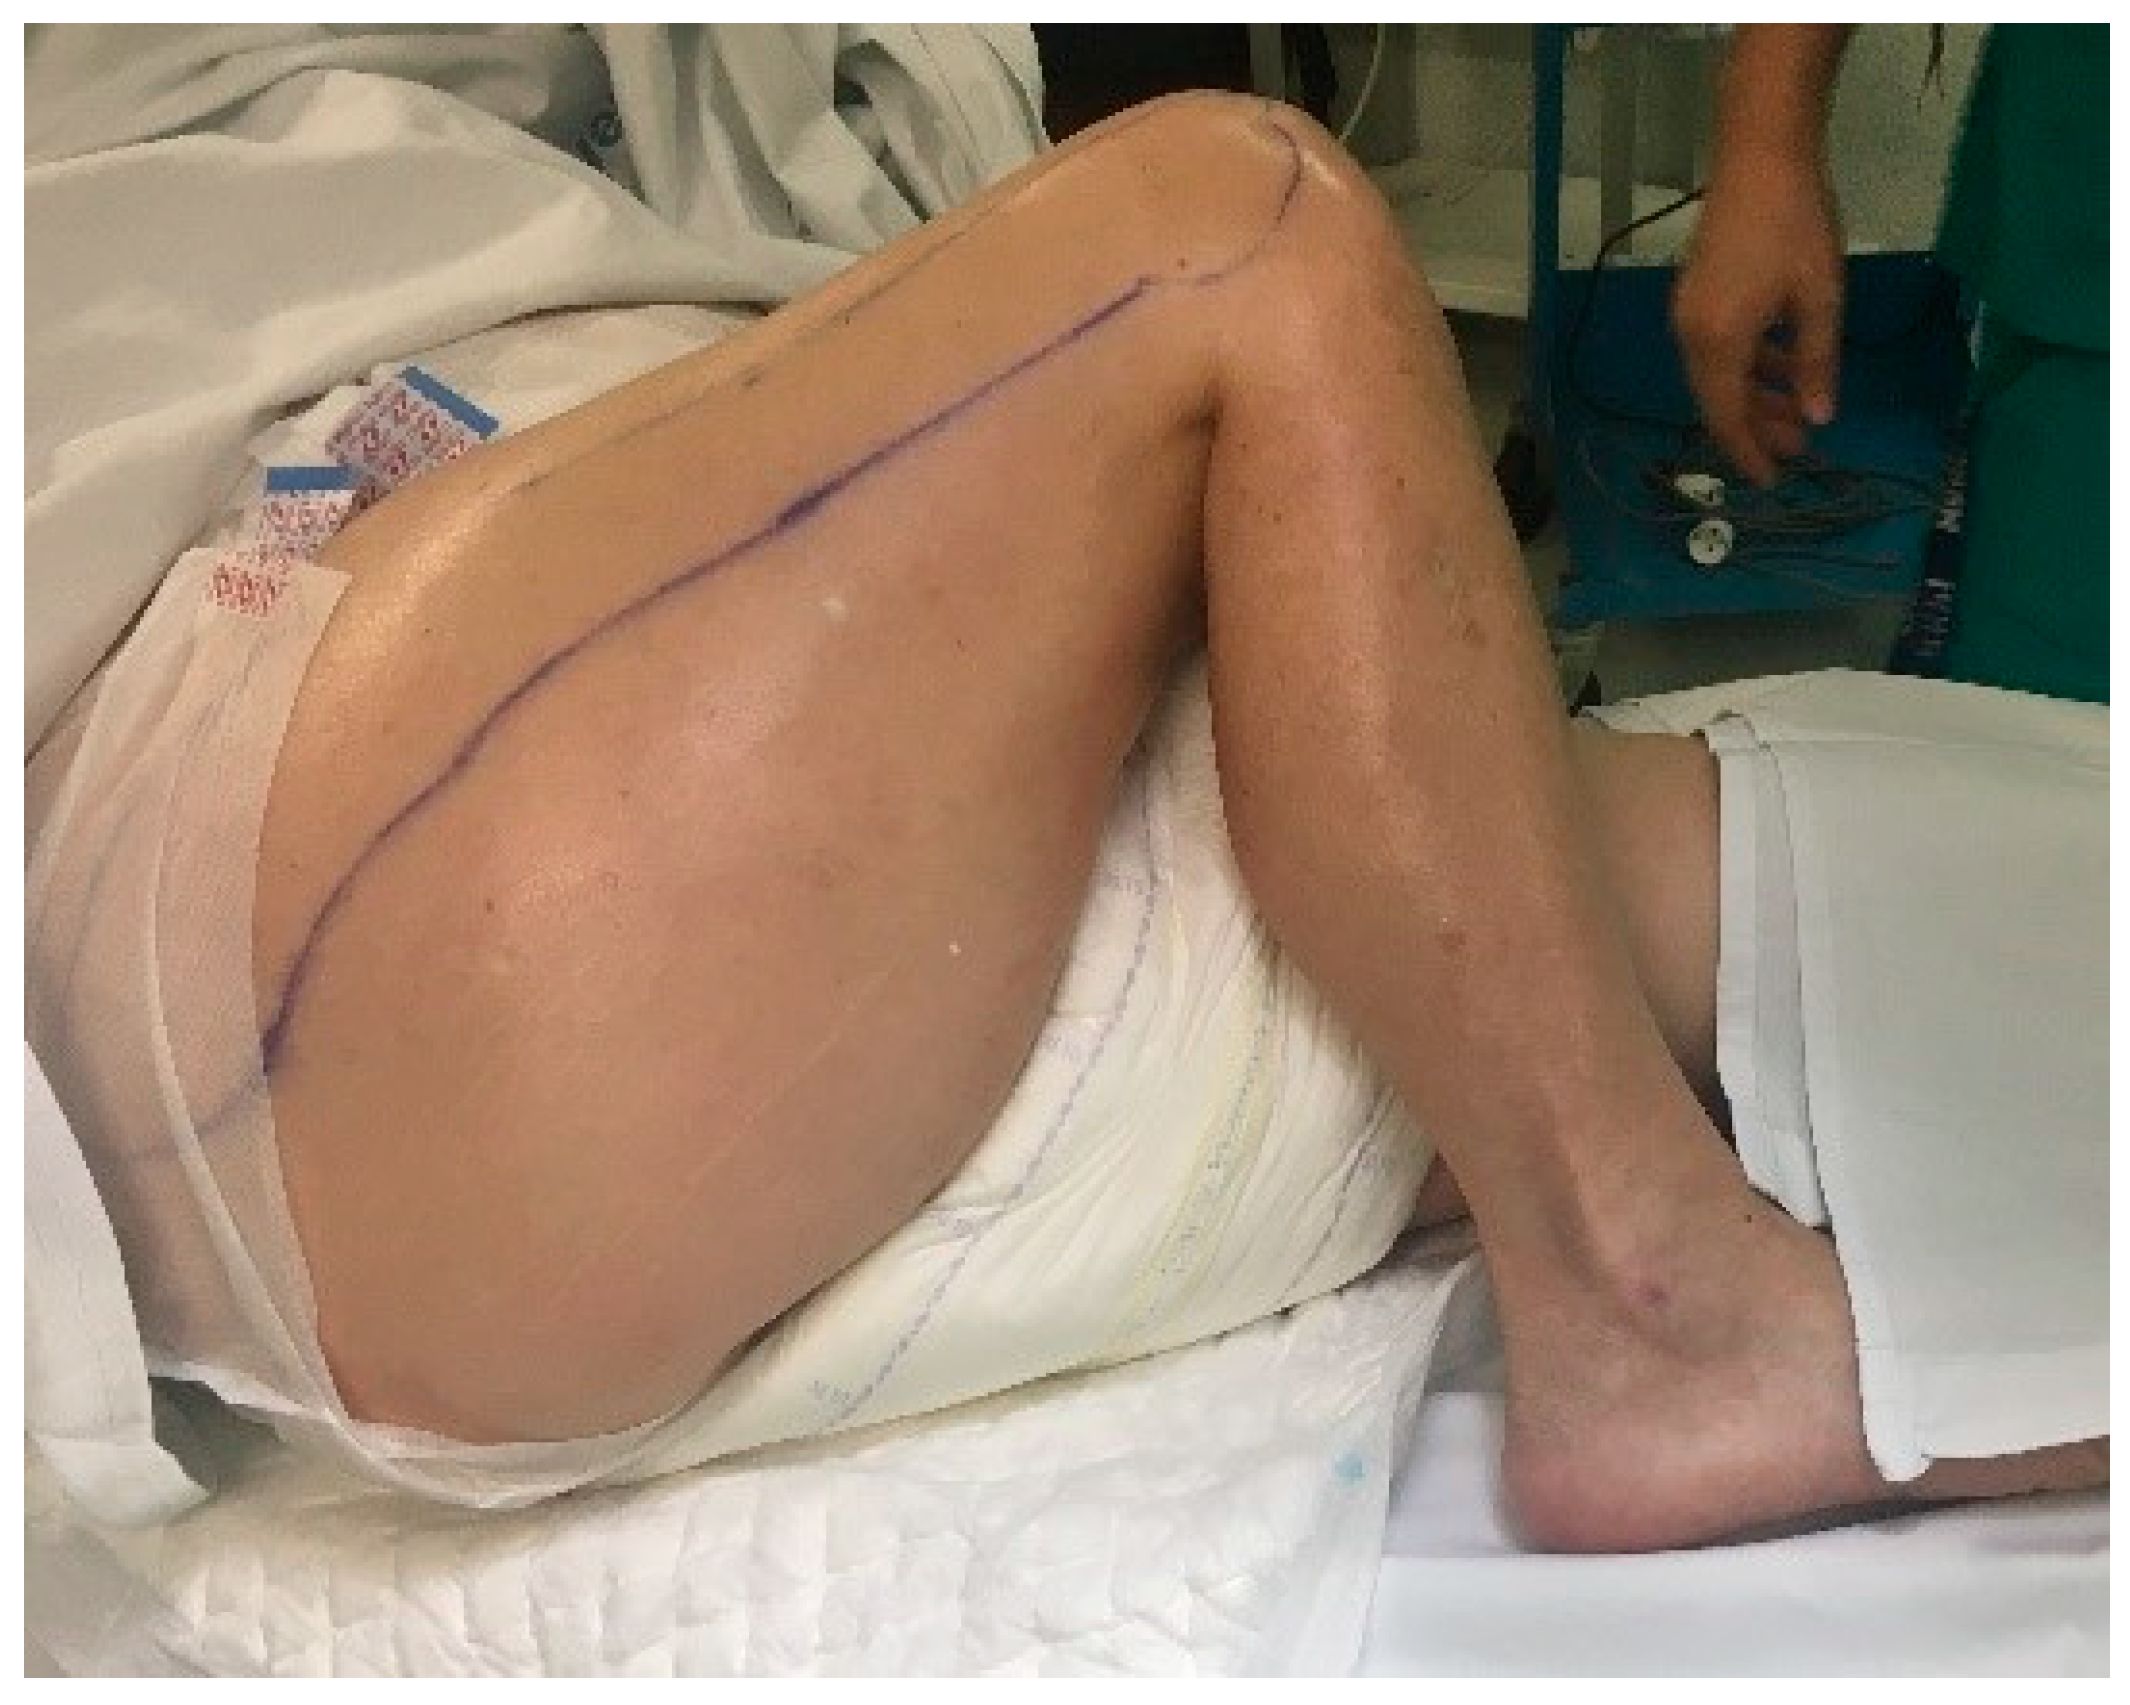 two-year postoperative view of the patient (wearing underwear) showing